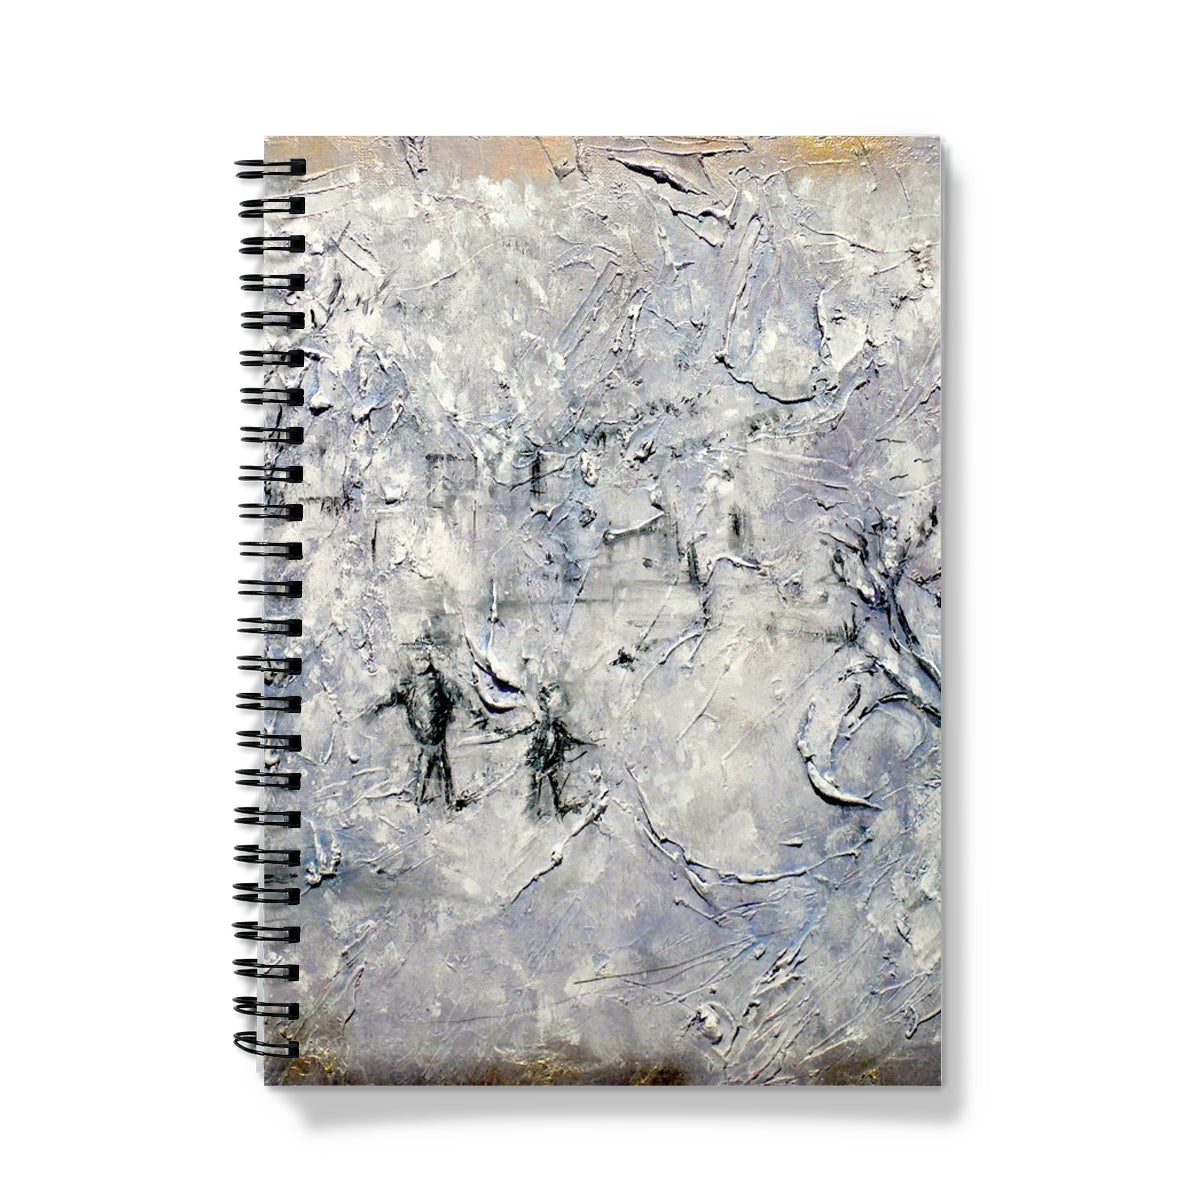 Father Daughter Snow Art Gifts Notebook-Journals & Notebooks-Abstract & Impressionistic Art Gallery-A5-Lined-Paintings, Prints, Homeware, Art Gifts From Scotland By Scottish Artist Kevin Hunter